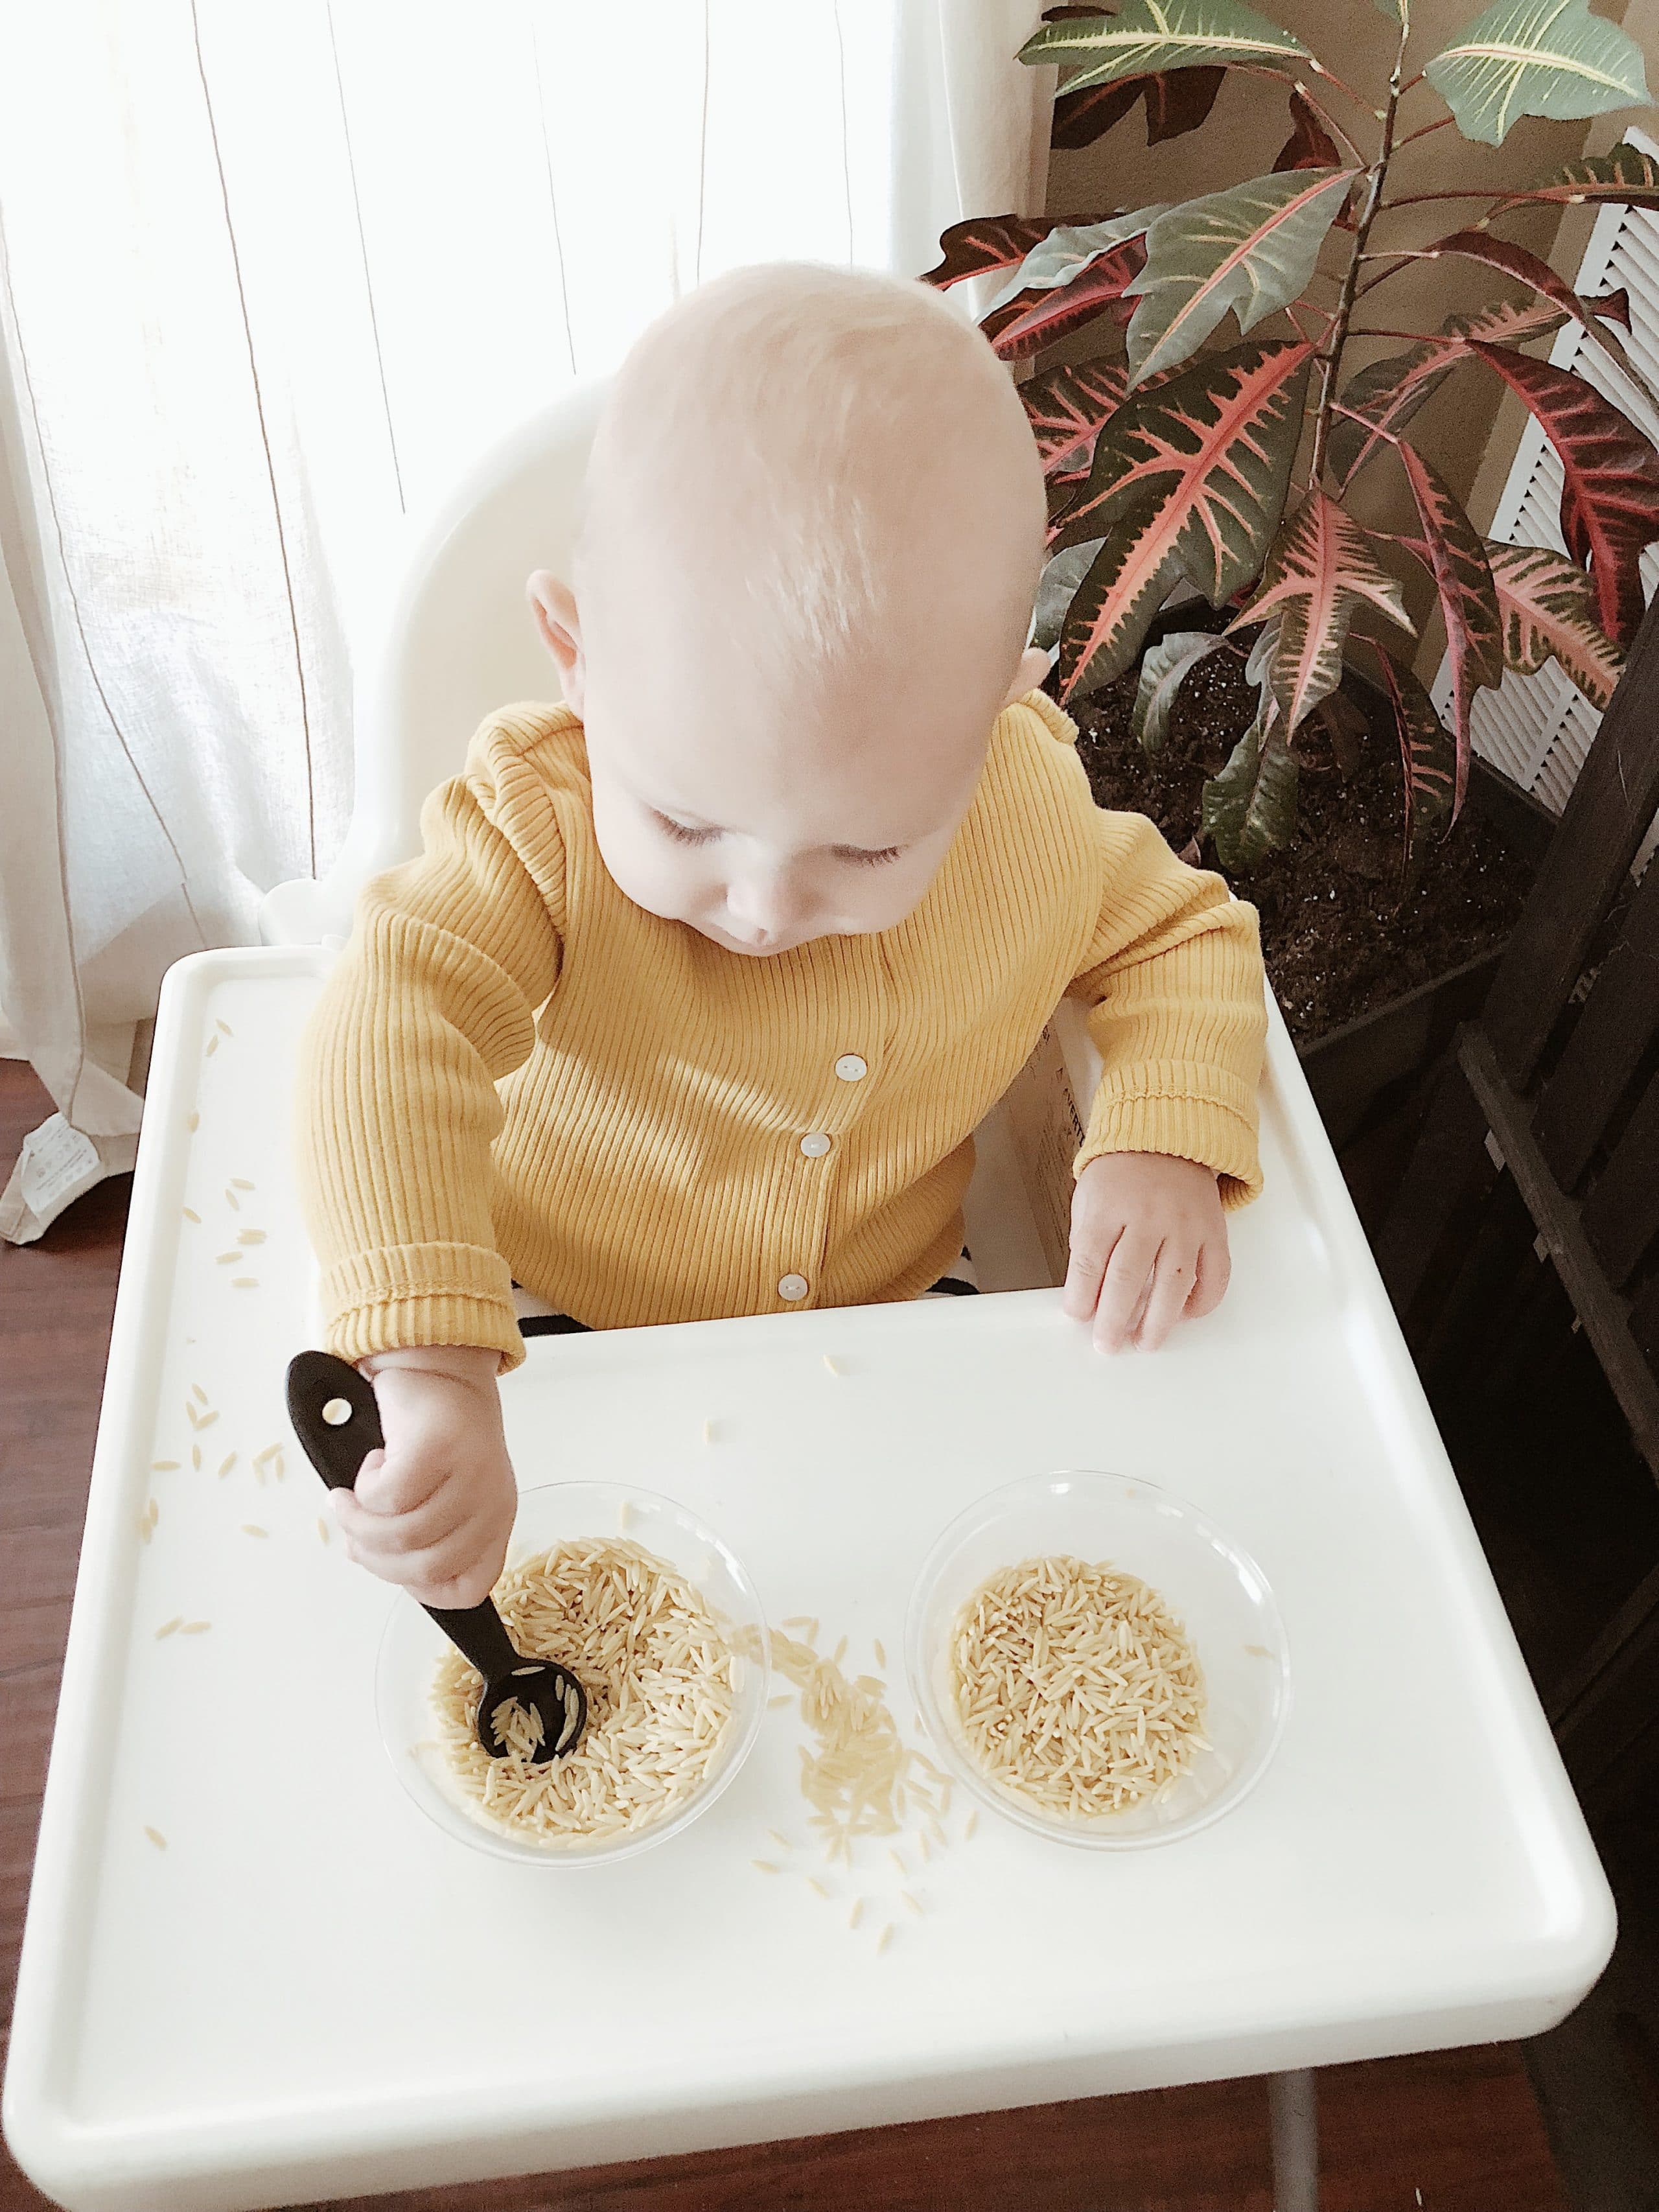 20 Toddler Activities for Learning and Development